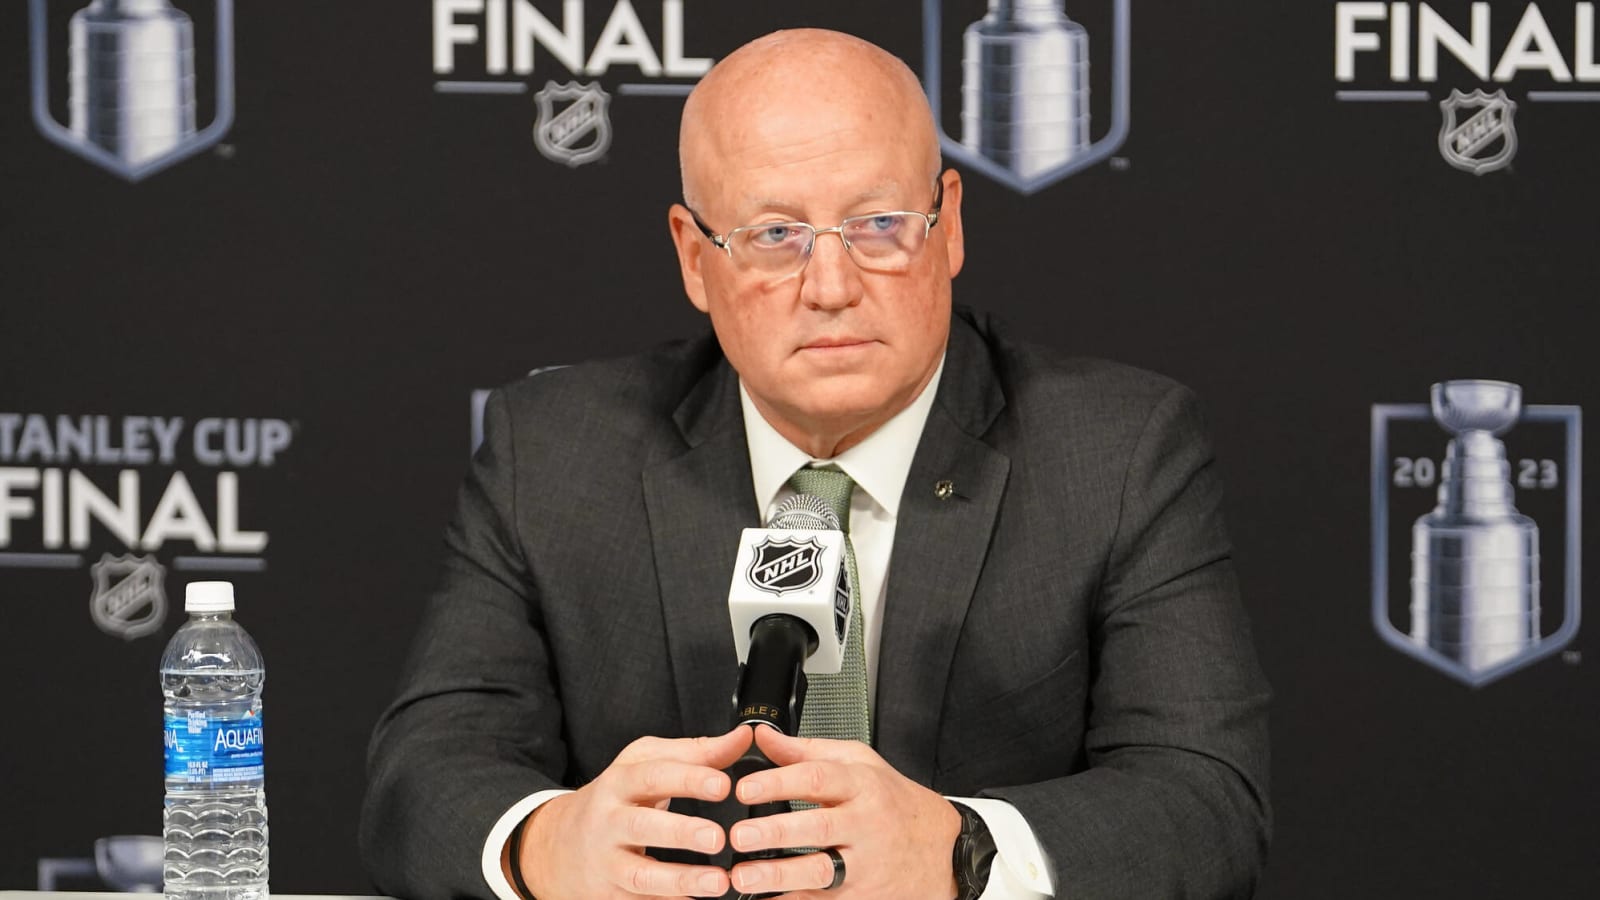 Bill Daly: “Stadium Series Games Are Important in the Standings”